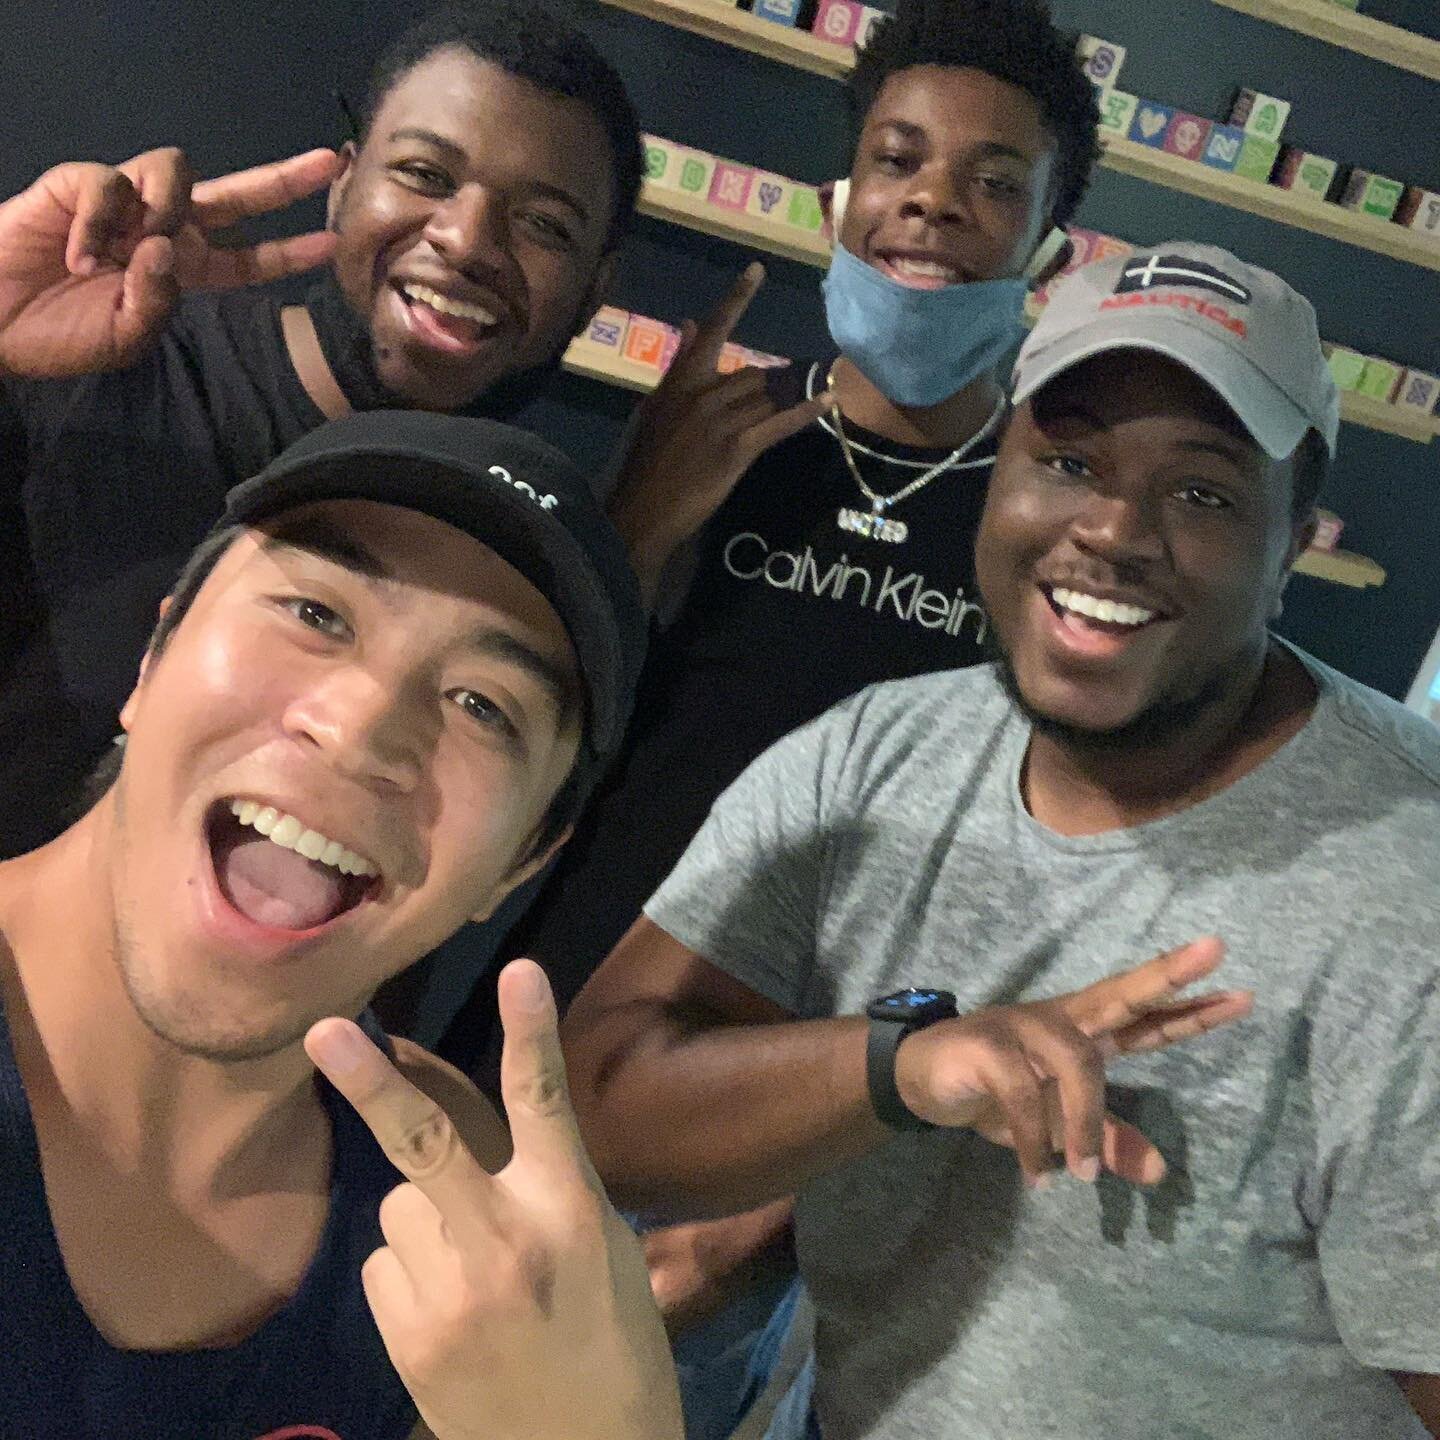 Awesome podcast recording at @hyggeclt with @andersdotcom @chancethelegacy &amp; @anklebreakertay about personal growth, business, &amp; how to communicating to young adults about Testicular Cancer Awareness 🔝🙏🏽💙 #Progress #MentalHealth #Awarenes